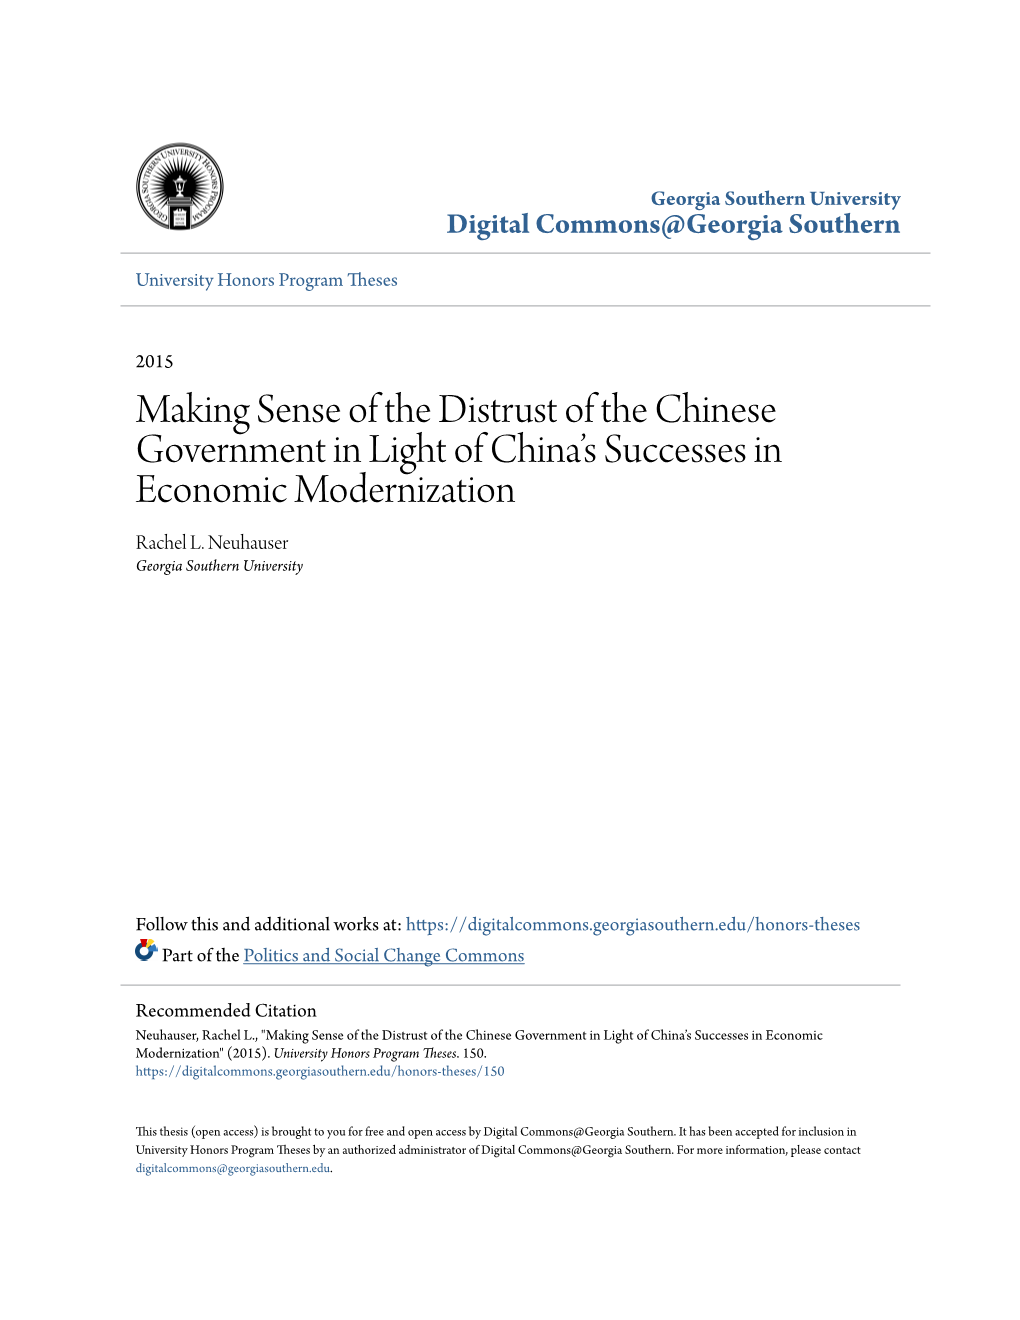 Making Sense of the Distrust of the Chinese Government in Light of China’S Successes in Economic Modernization Rachel L